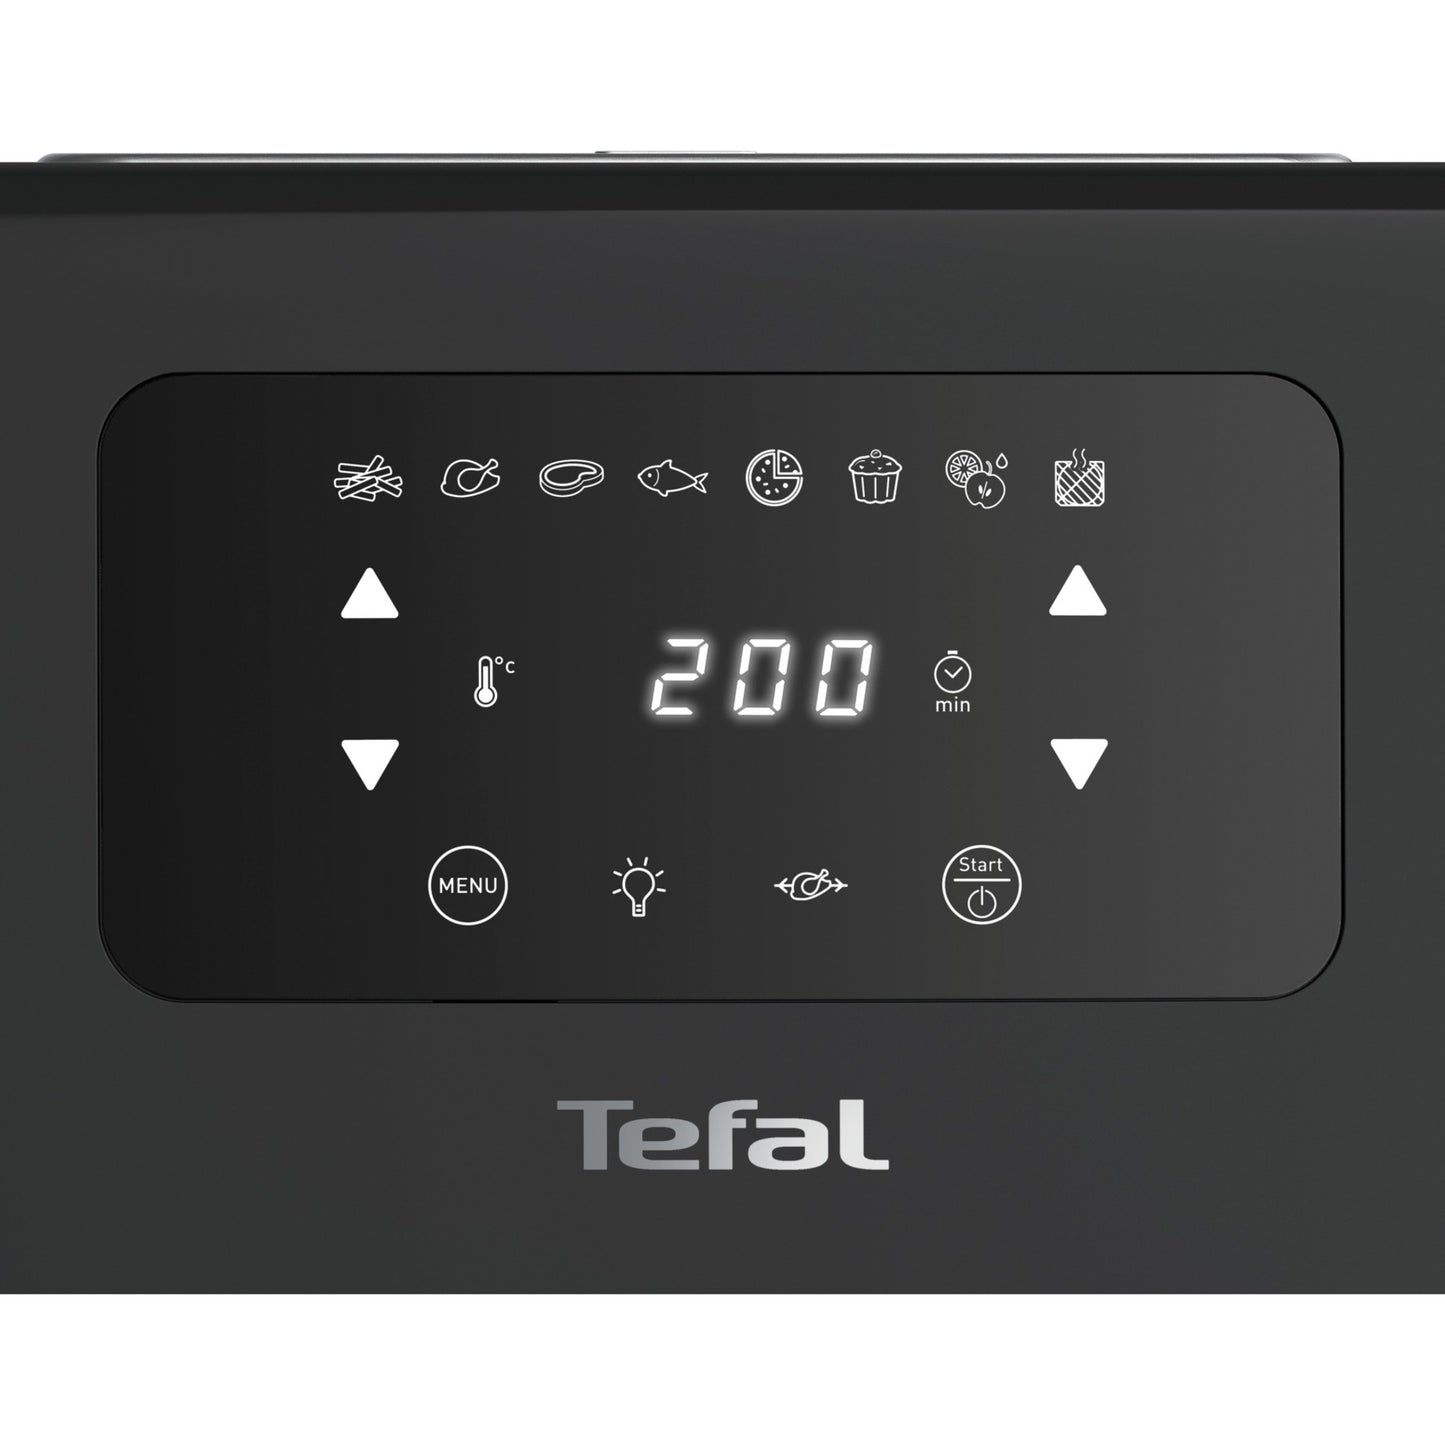 Tefal Easy Fry Oven Grill